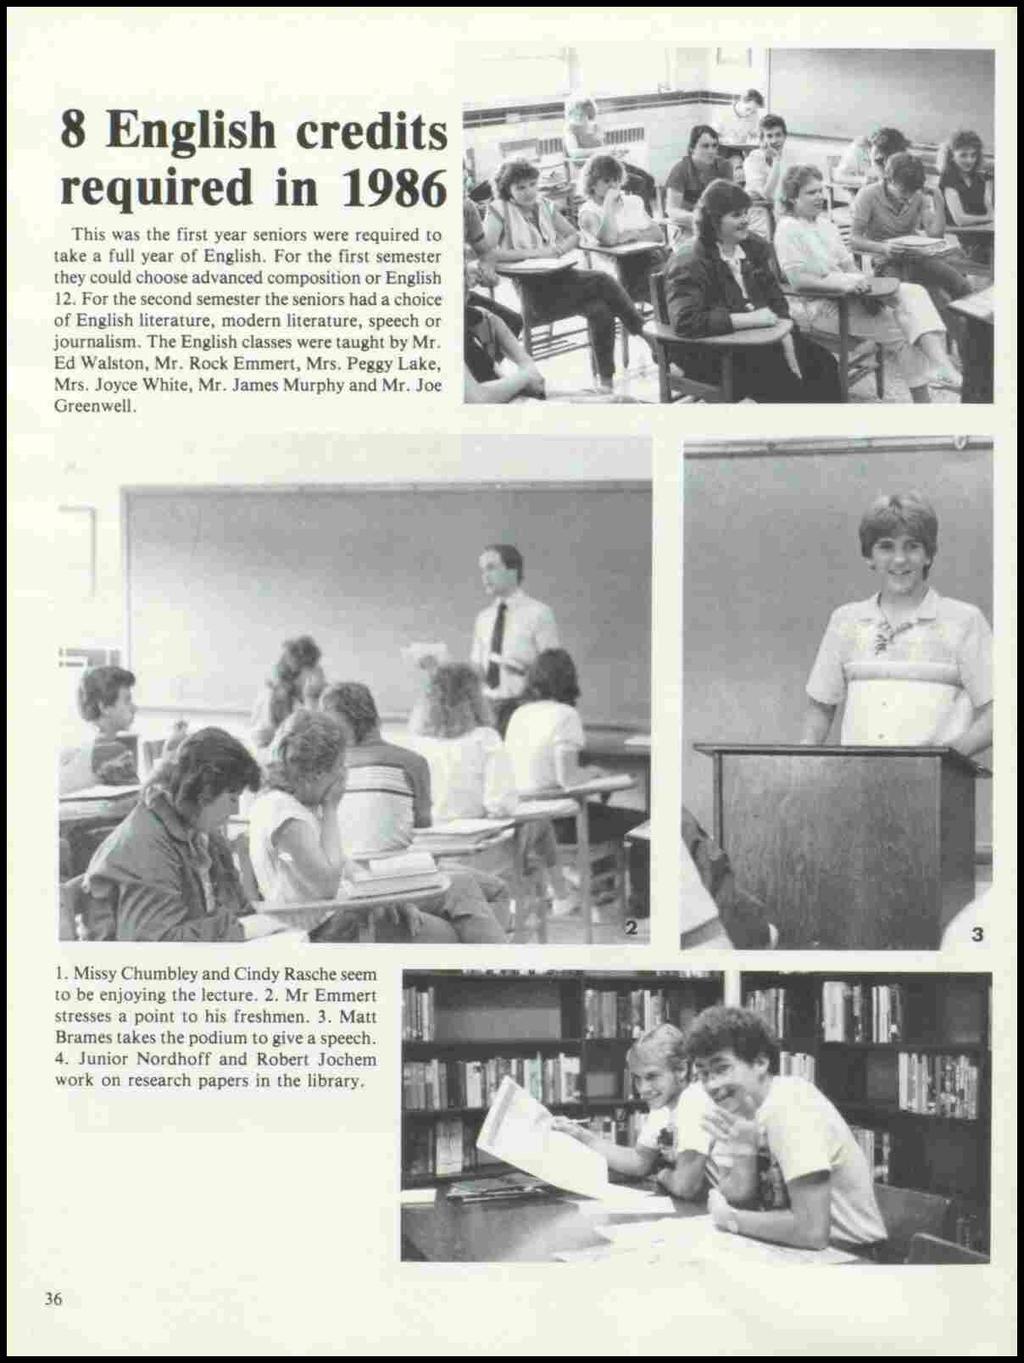 8 English credits required in 1986 This was the first year seniors were required to take a full year of English. For the first semester they could choose advanced composition or English 12.